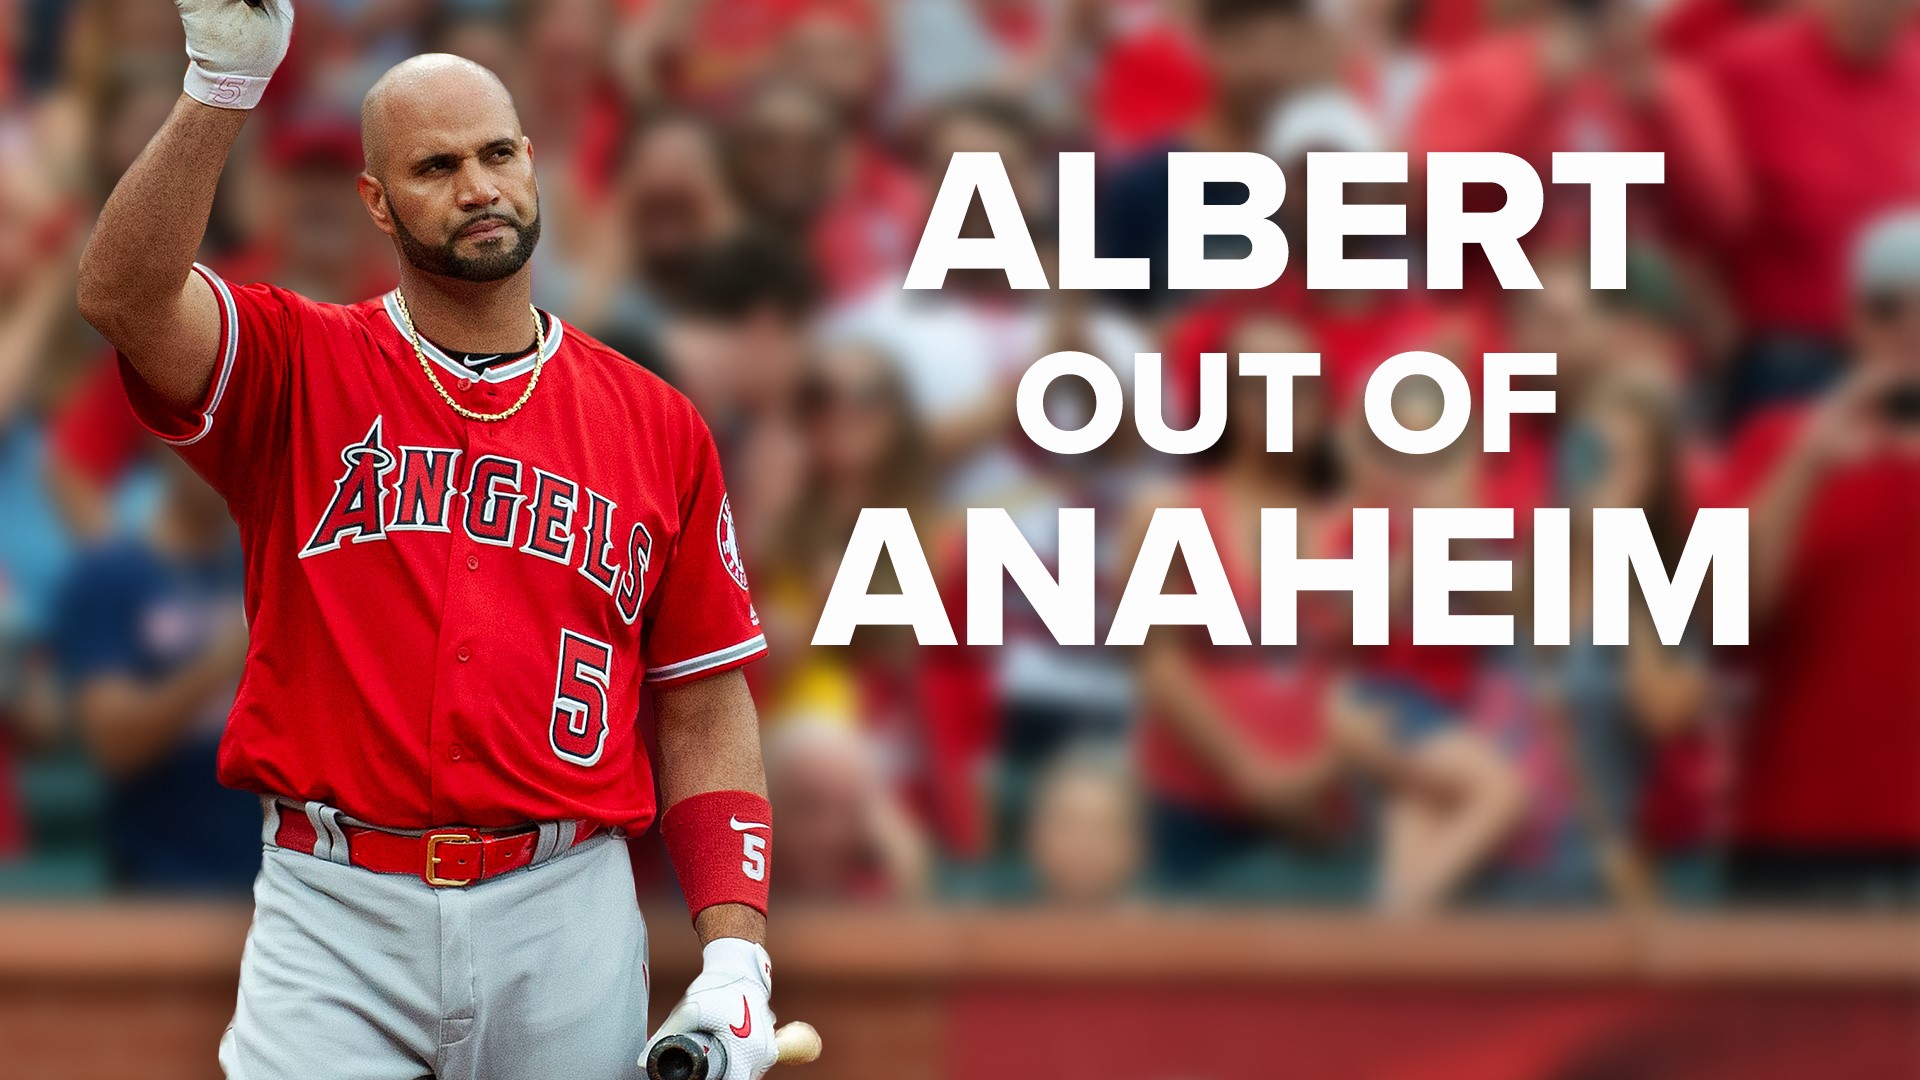 Pujols still has some pop and is chasing 700 home runs.